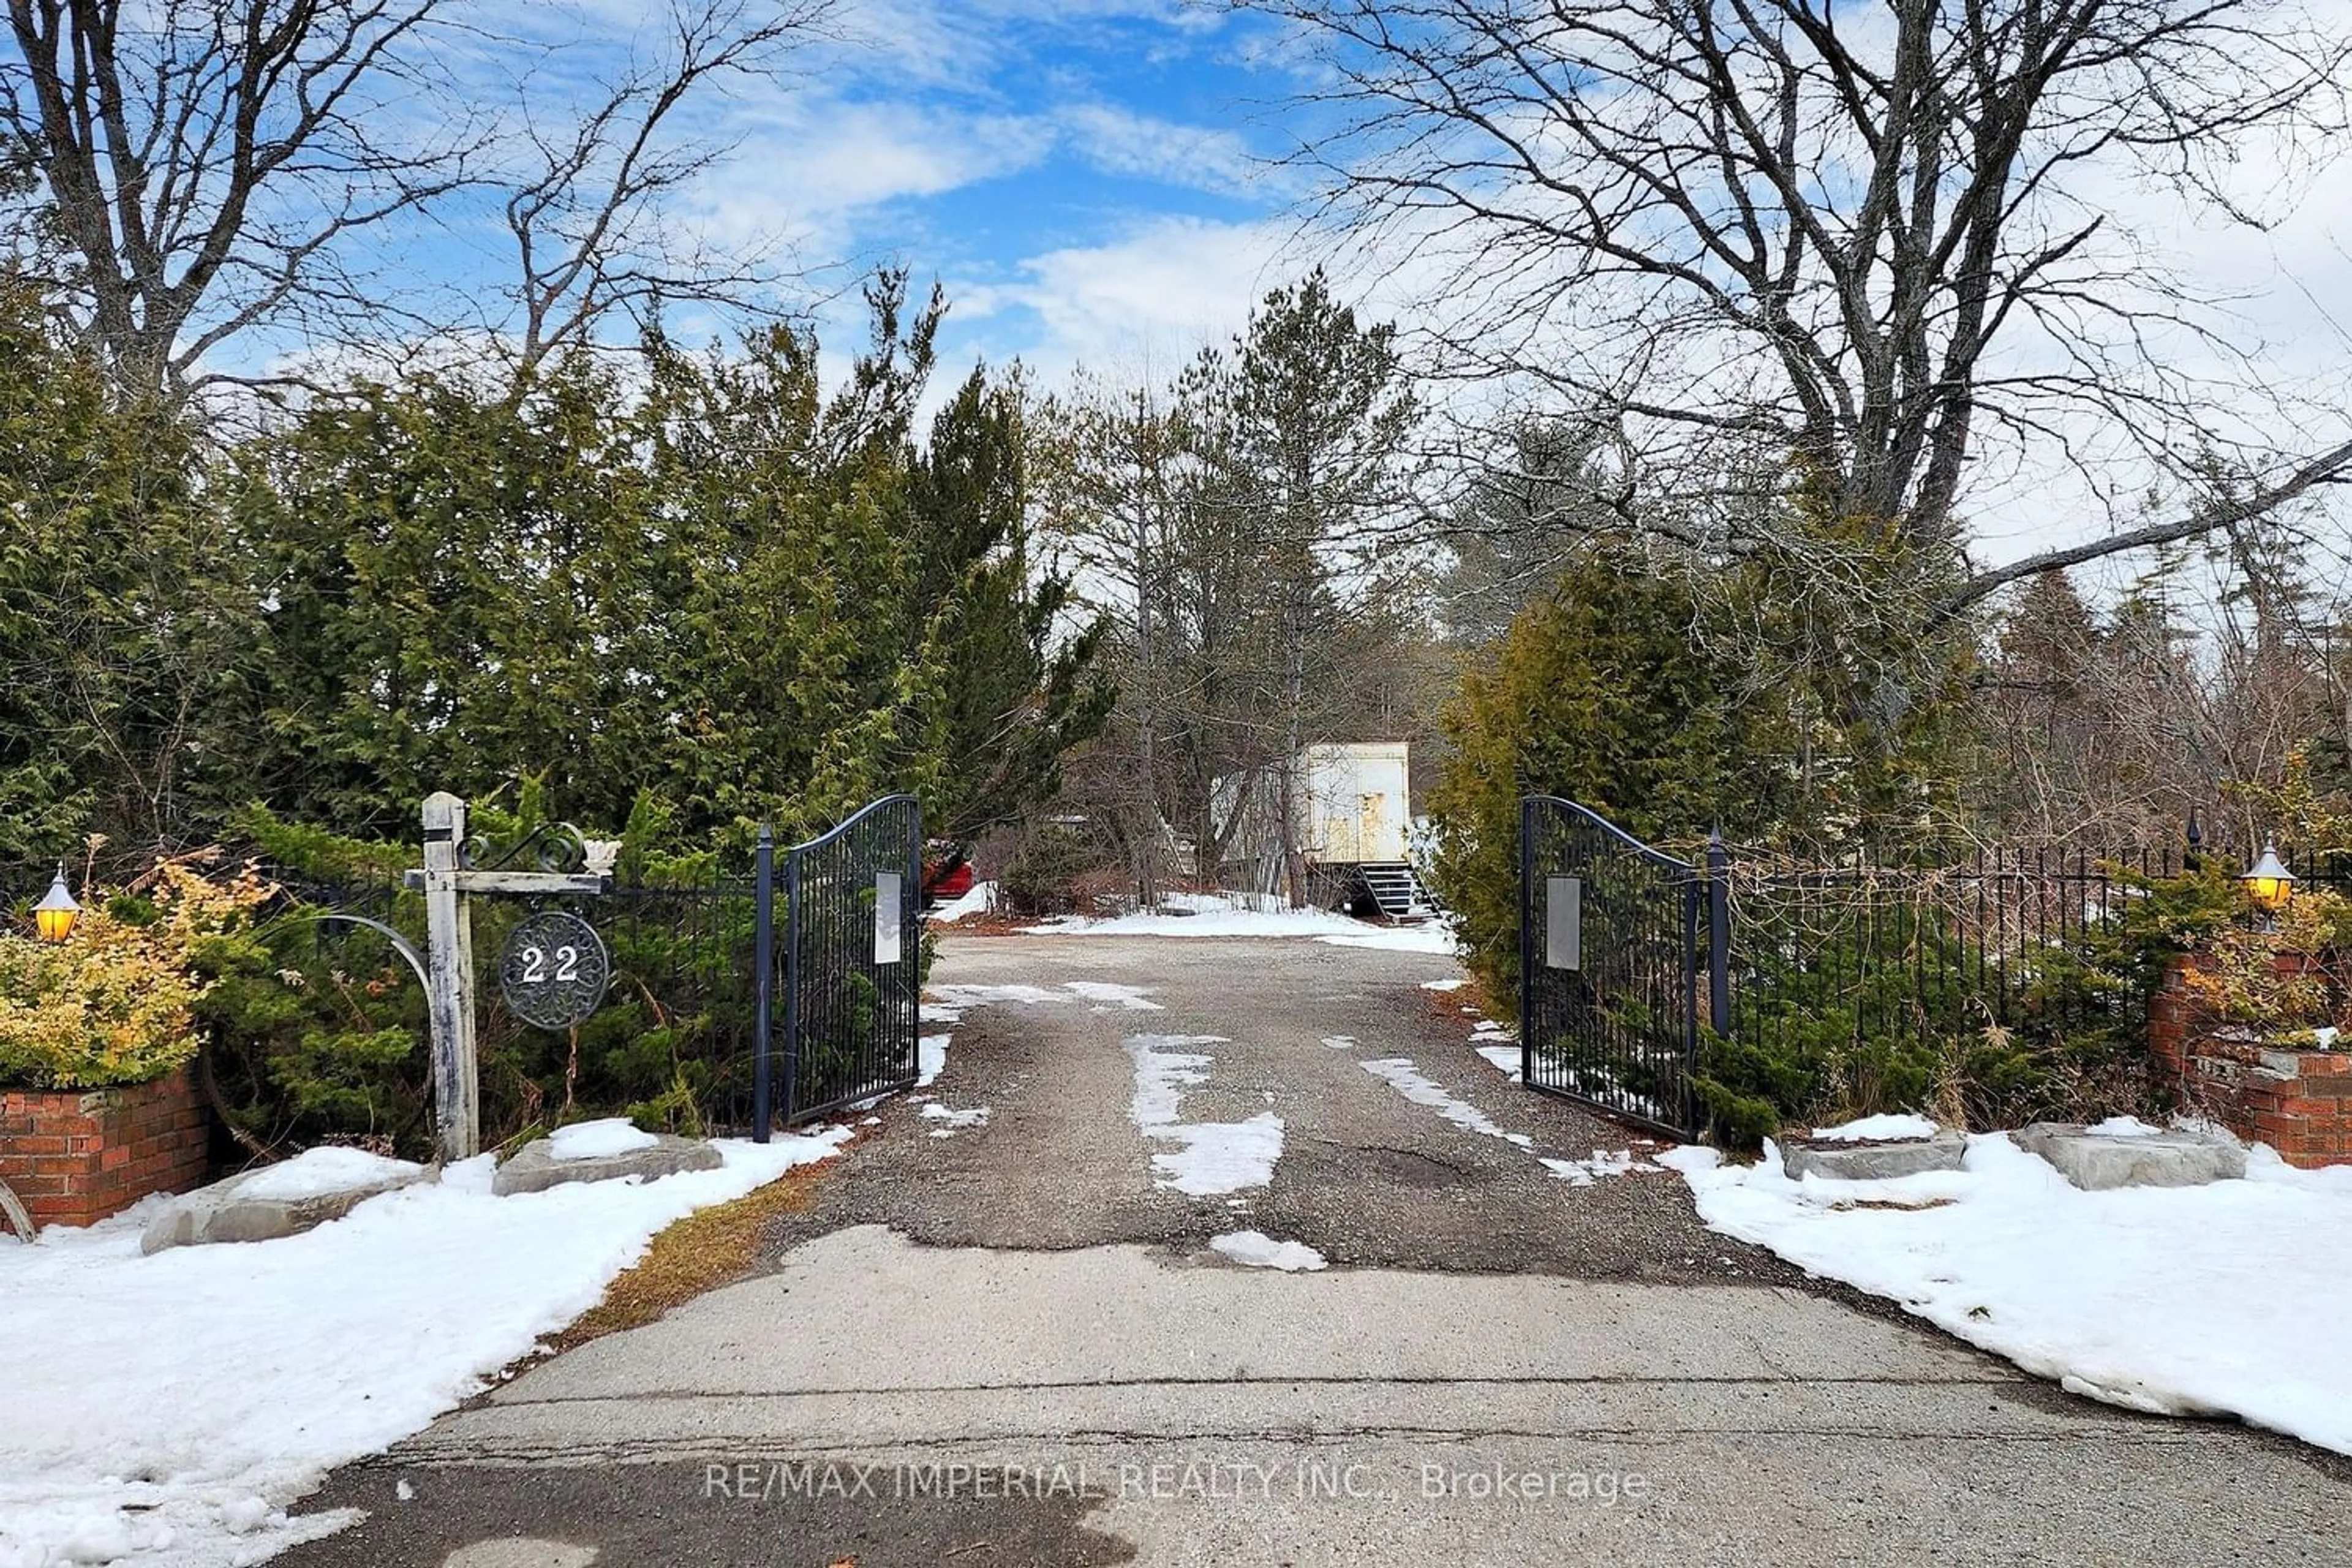 Street view for 22 Ratcliff Rd, Whitchurch-Stouffville Ontario L4A 7X5